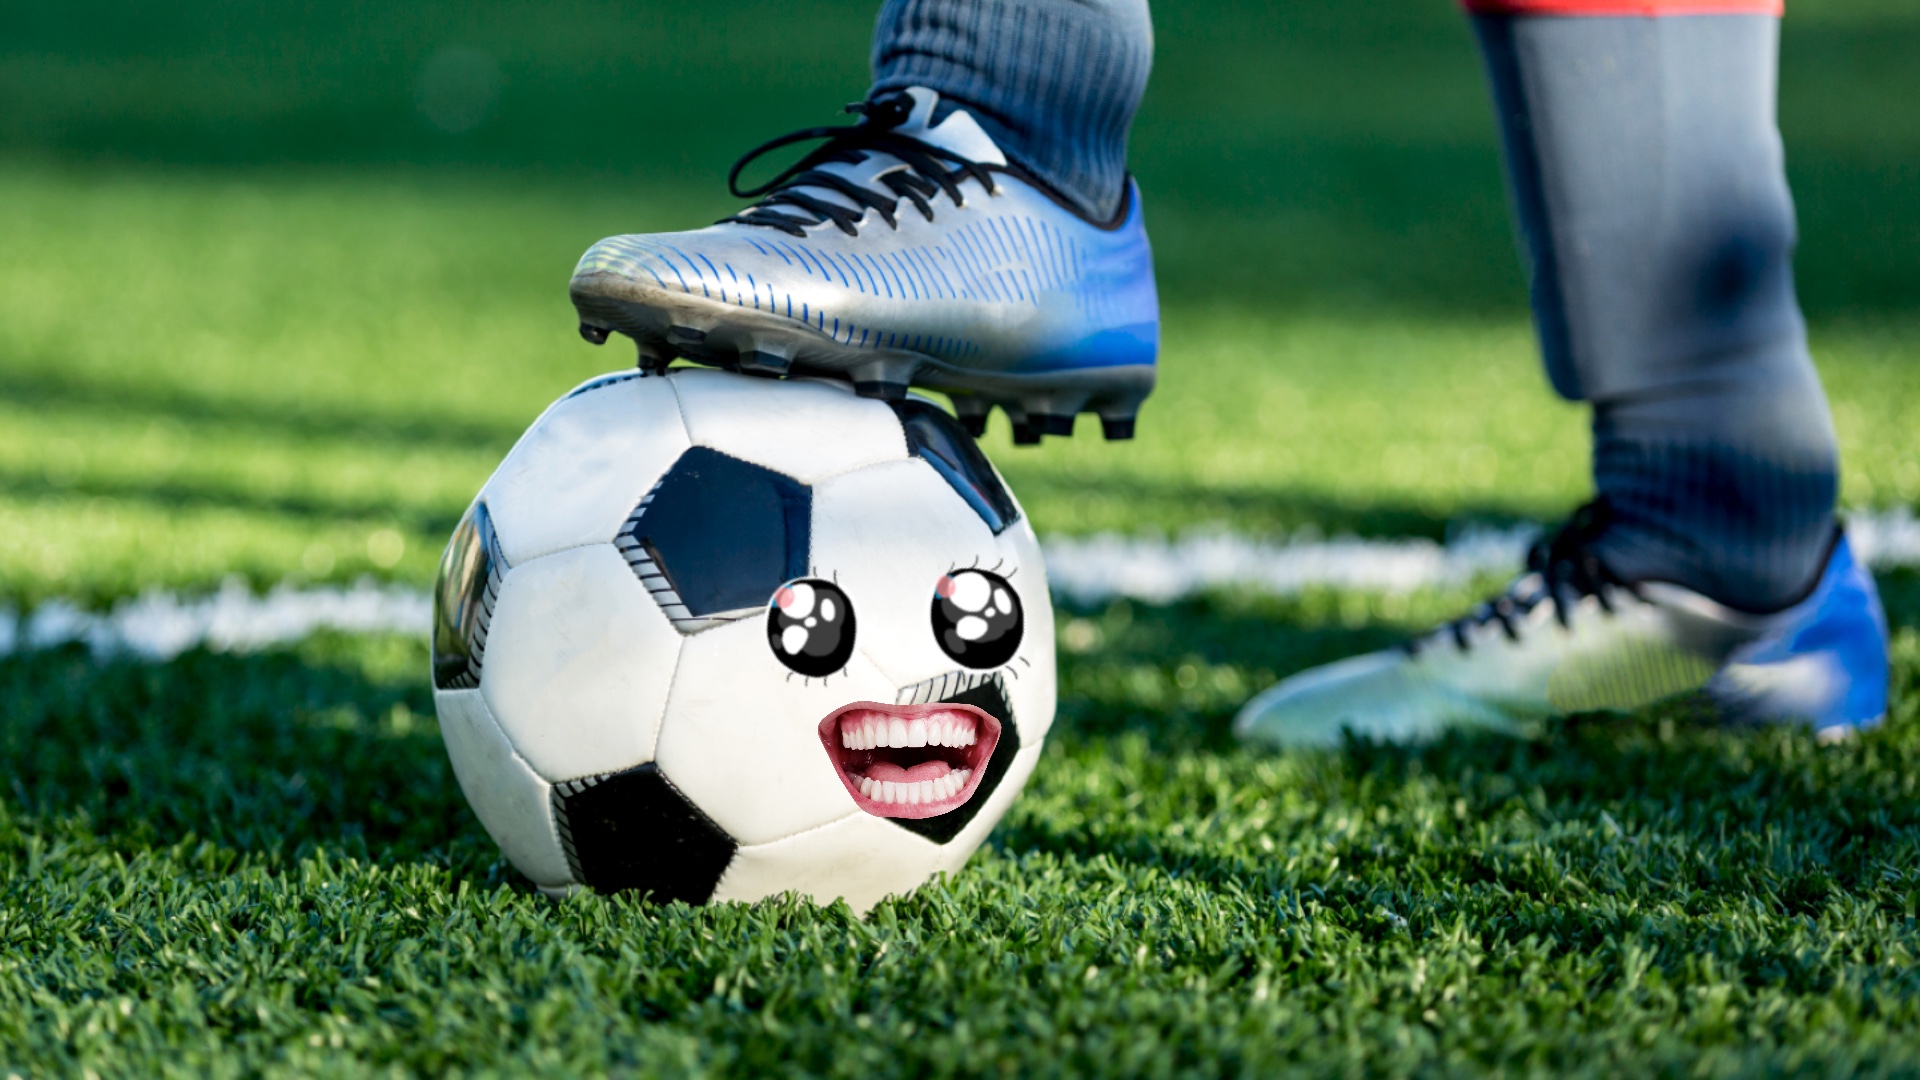 A football boot resting on a smiling football